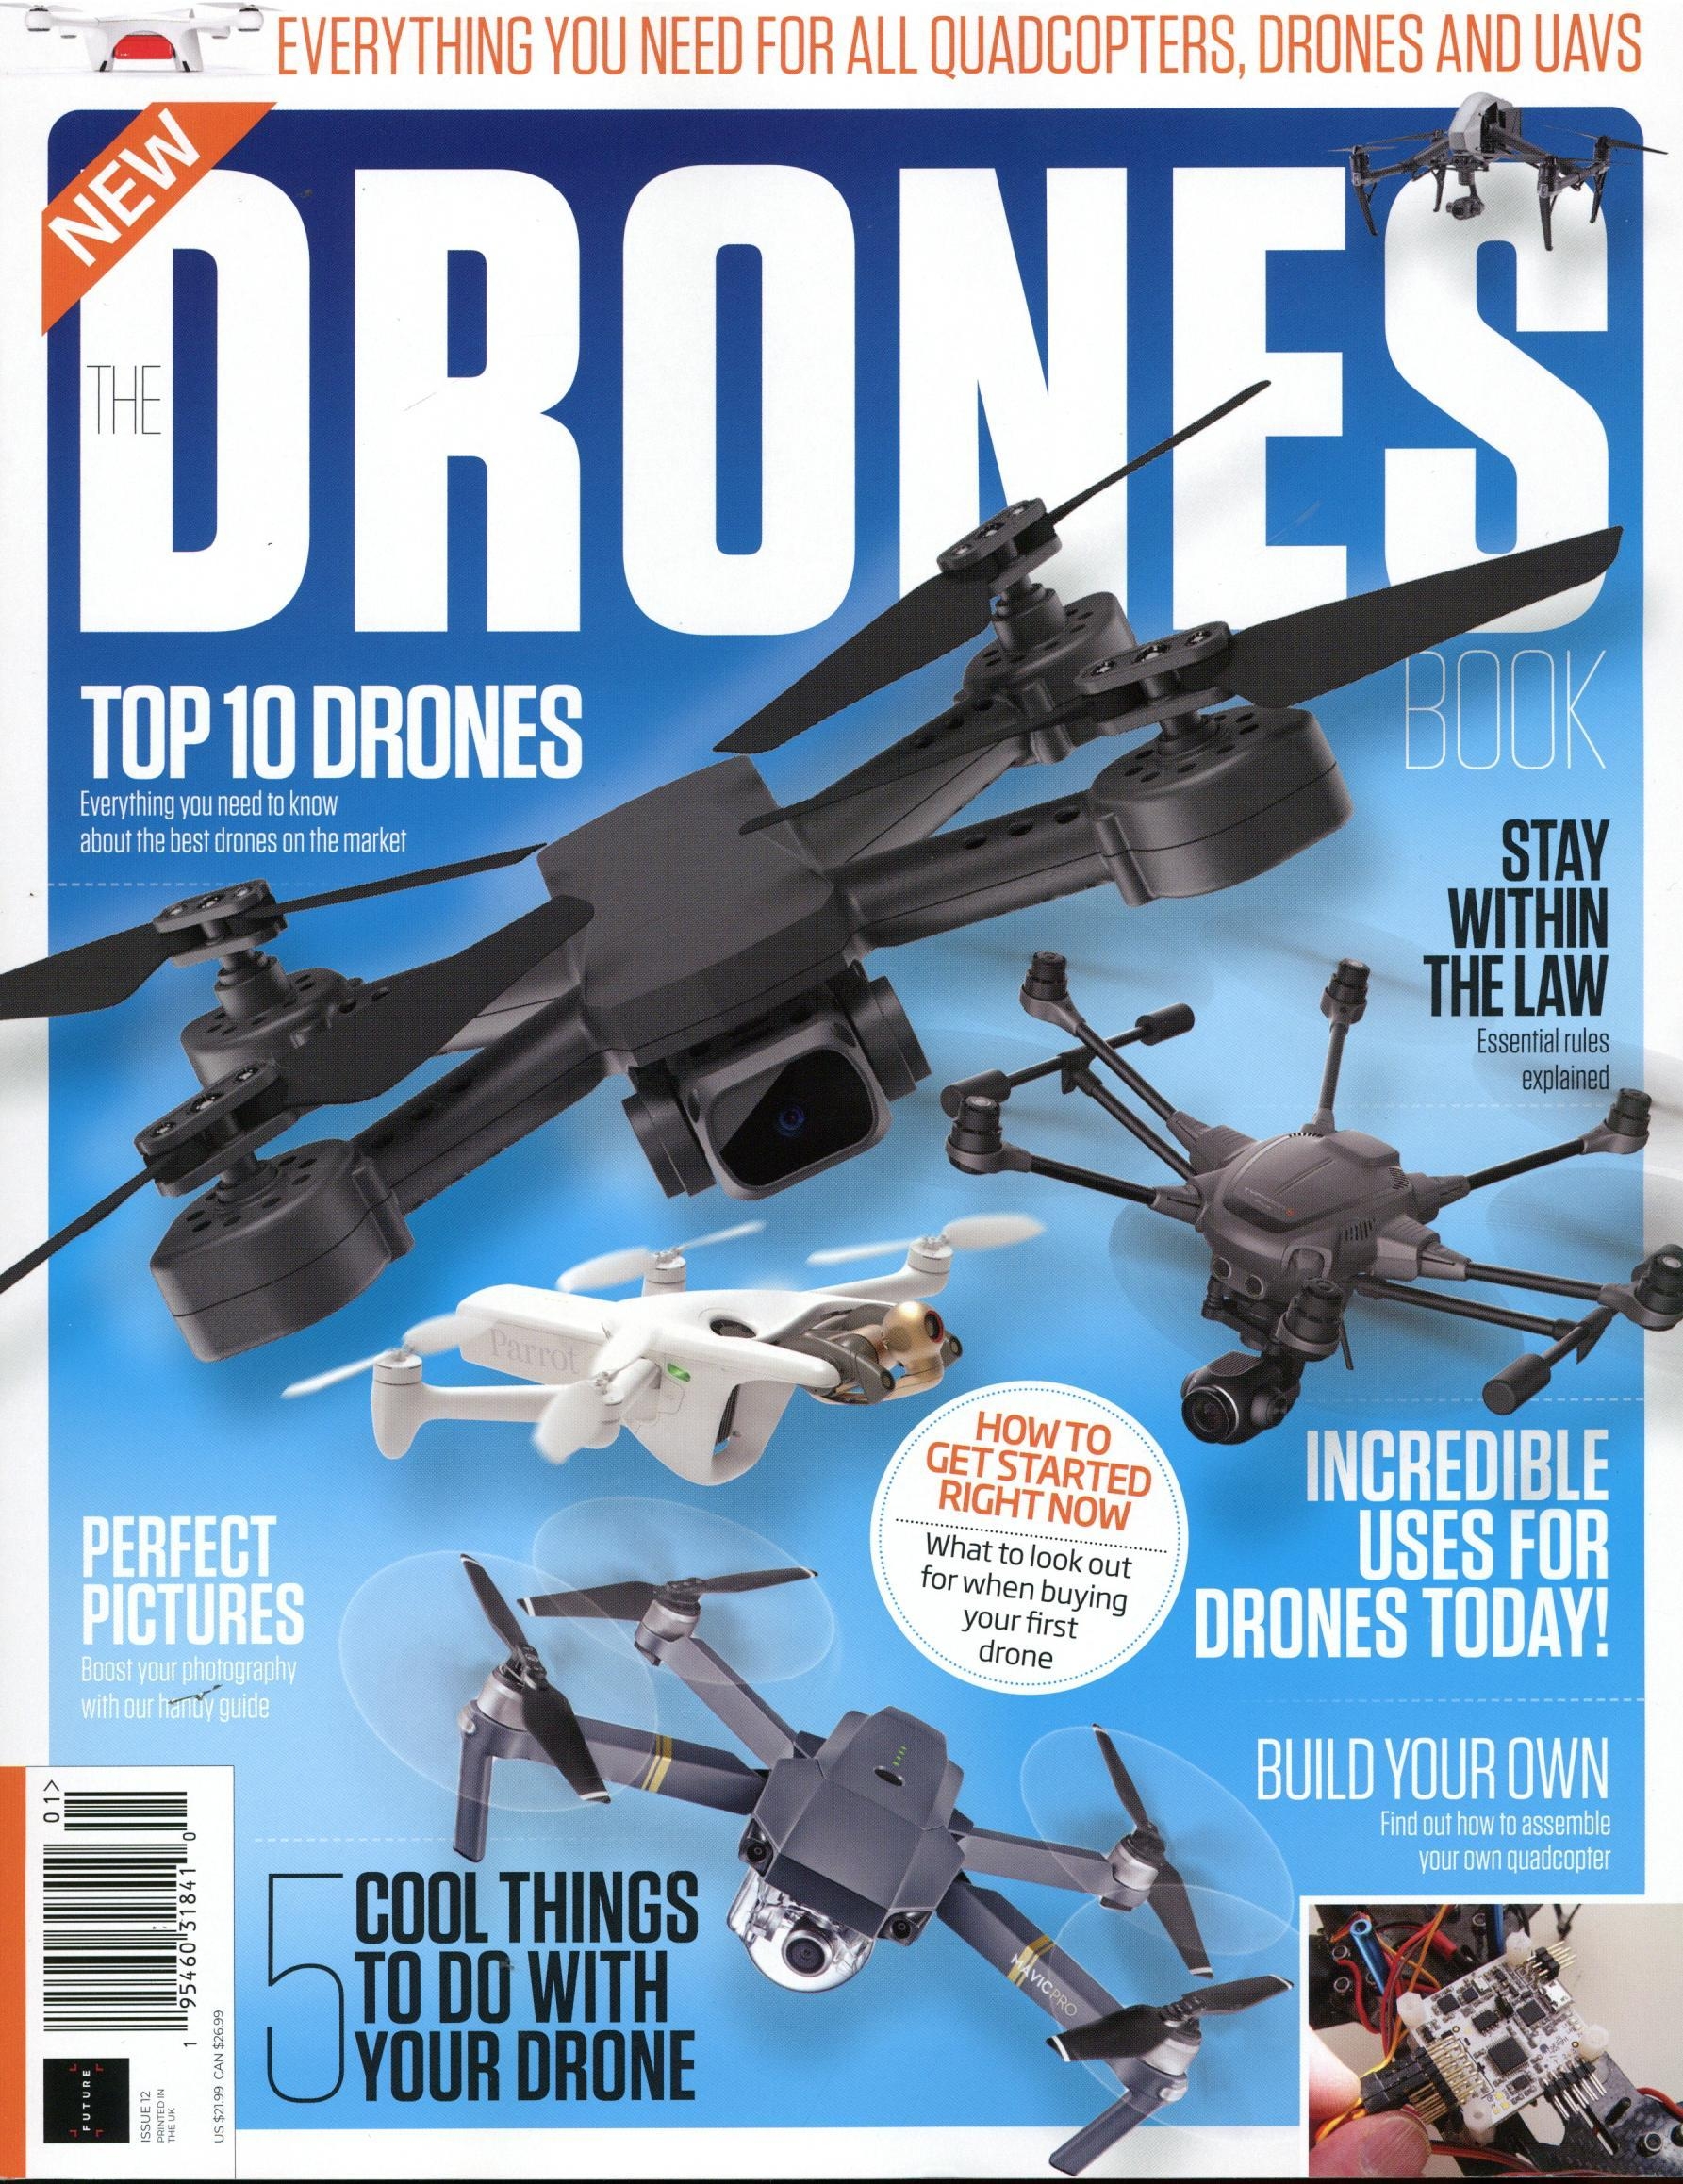 The Drones Book